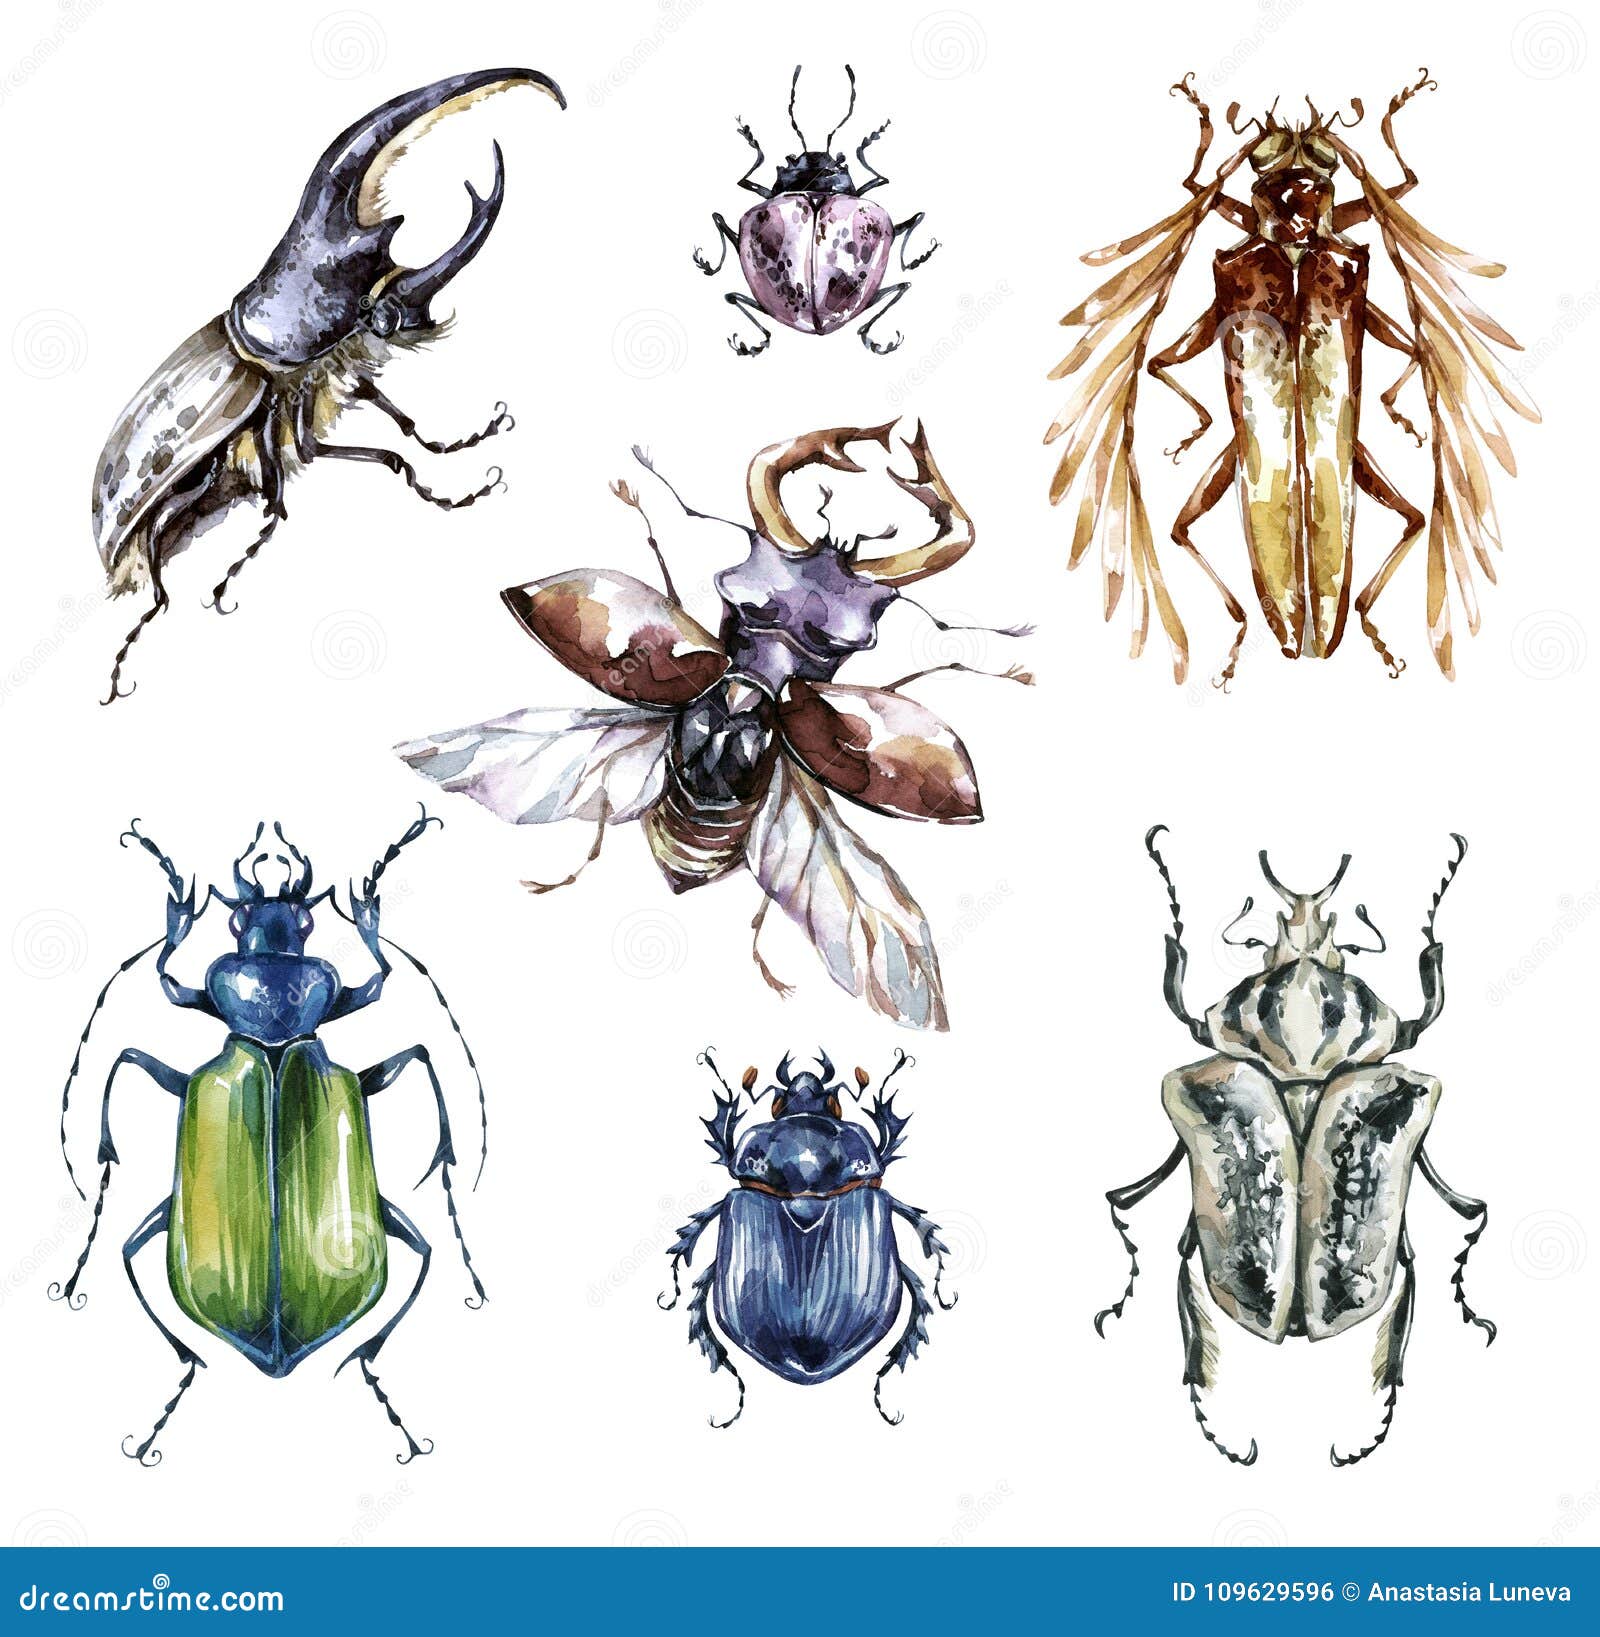 watercolor beetles collection on a white background. animal, insects. entomology. wildlife. can be printed on t-shirts